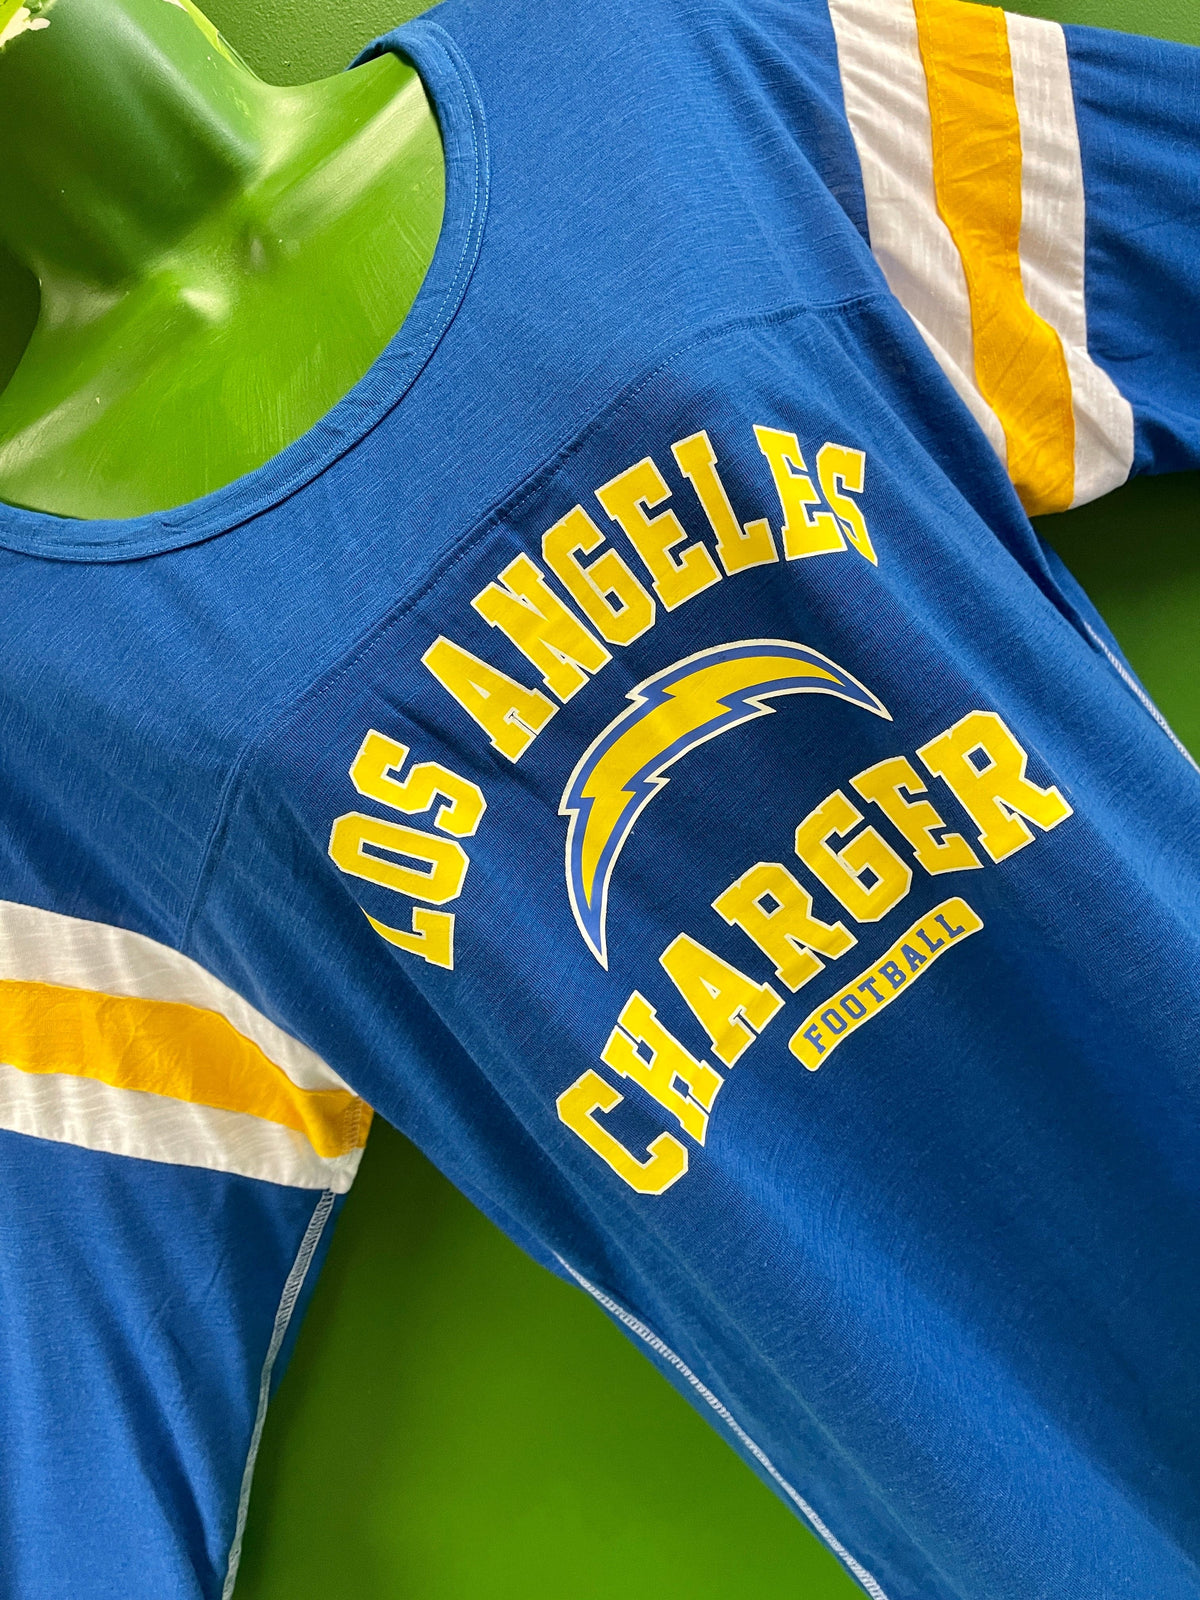 NFL Los Angeles Chargers Striped Sleeve Lightweight Top Women's Large